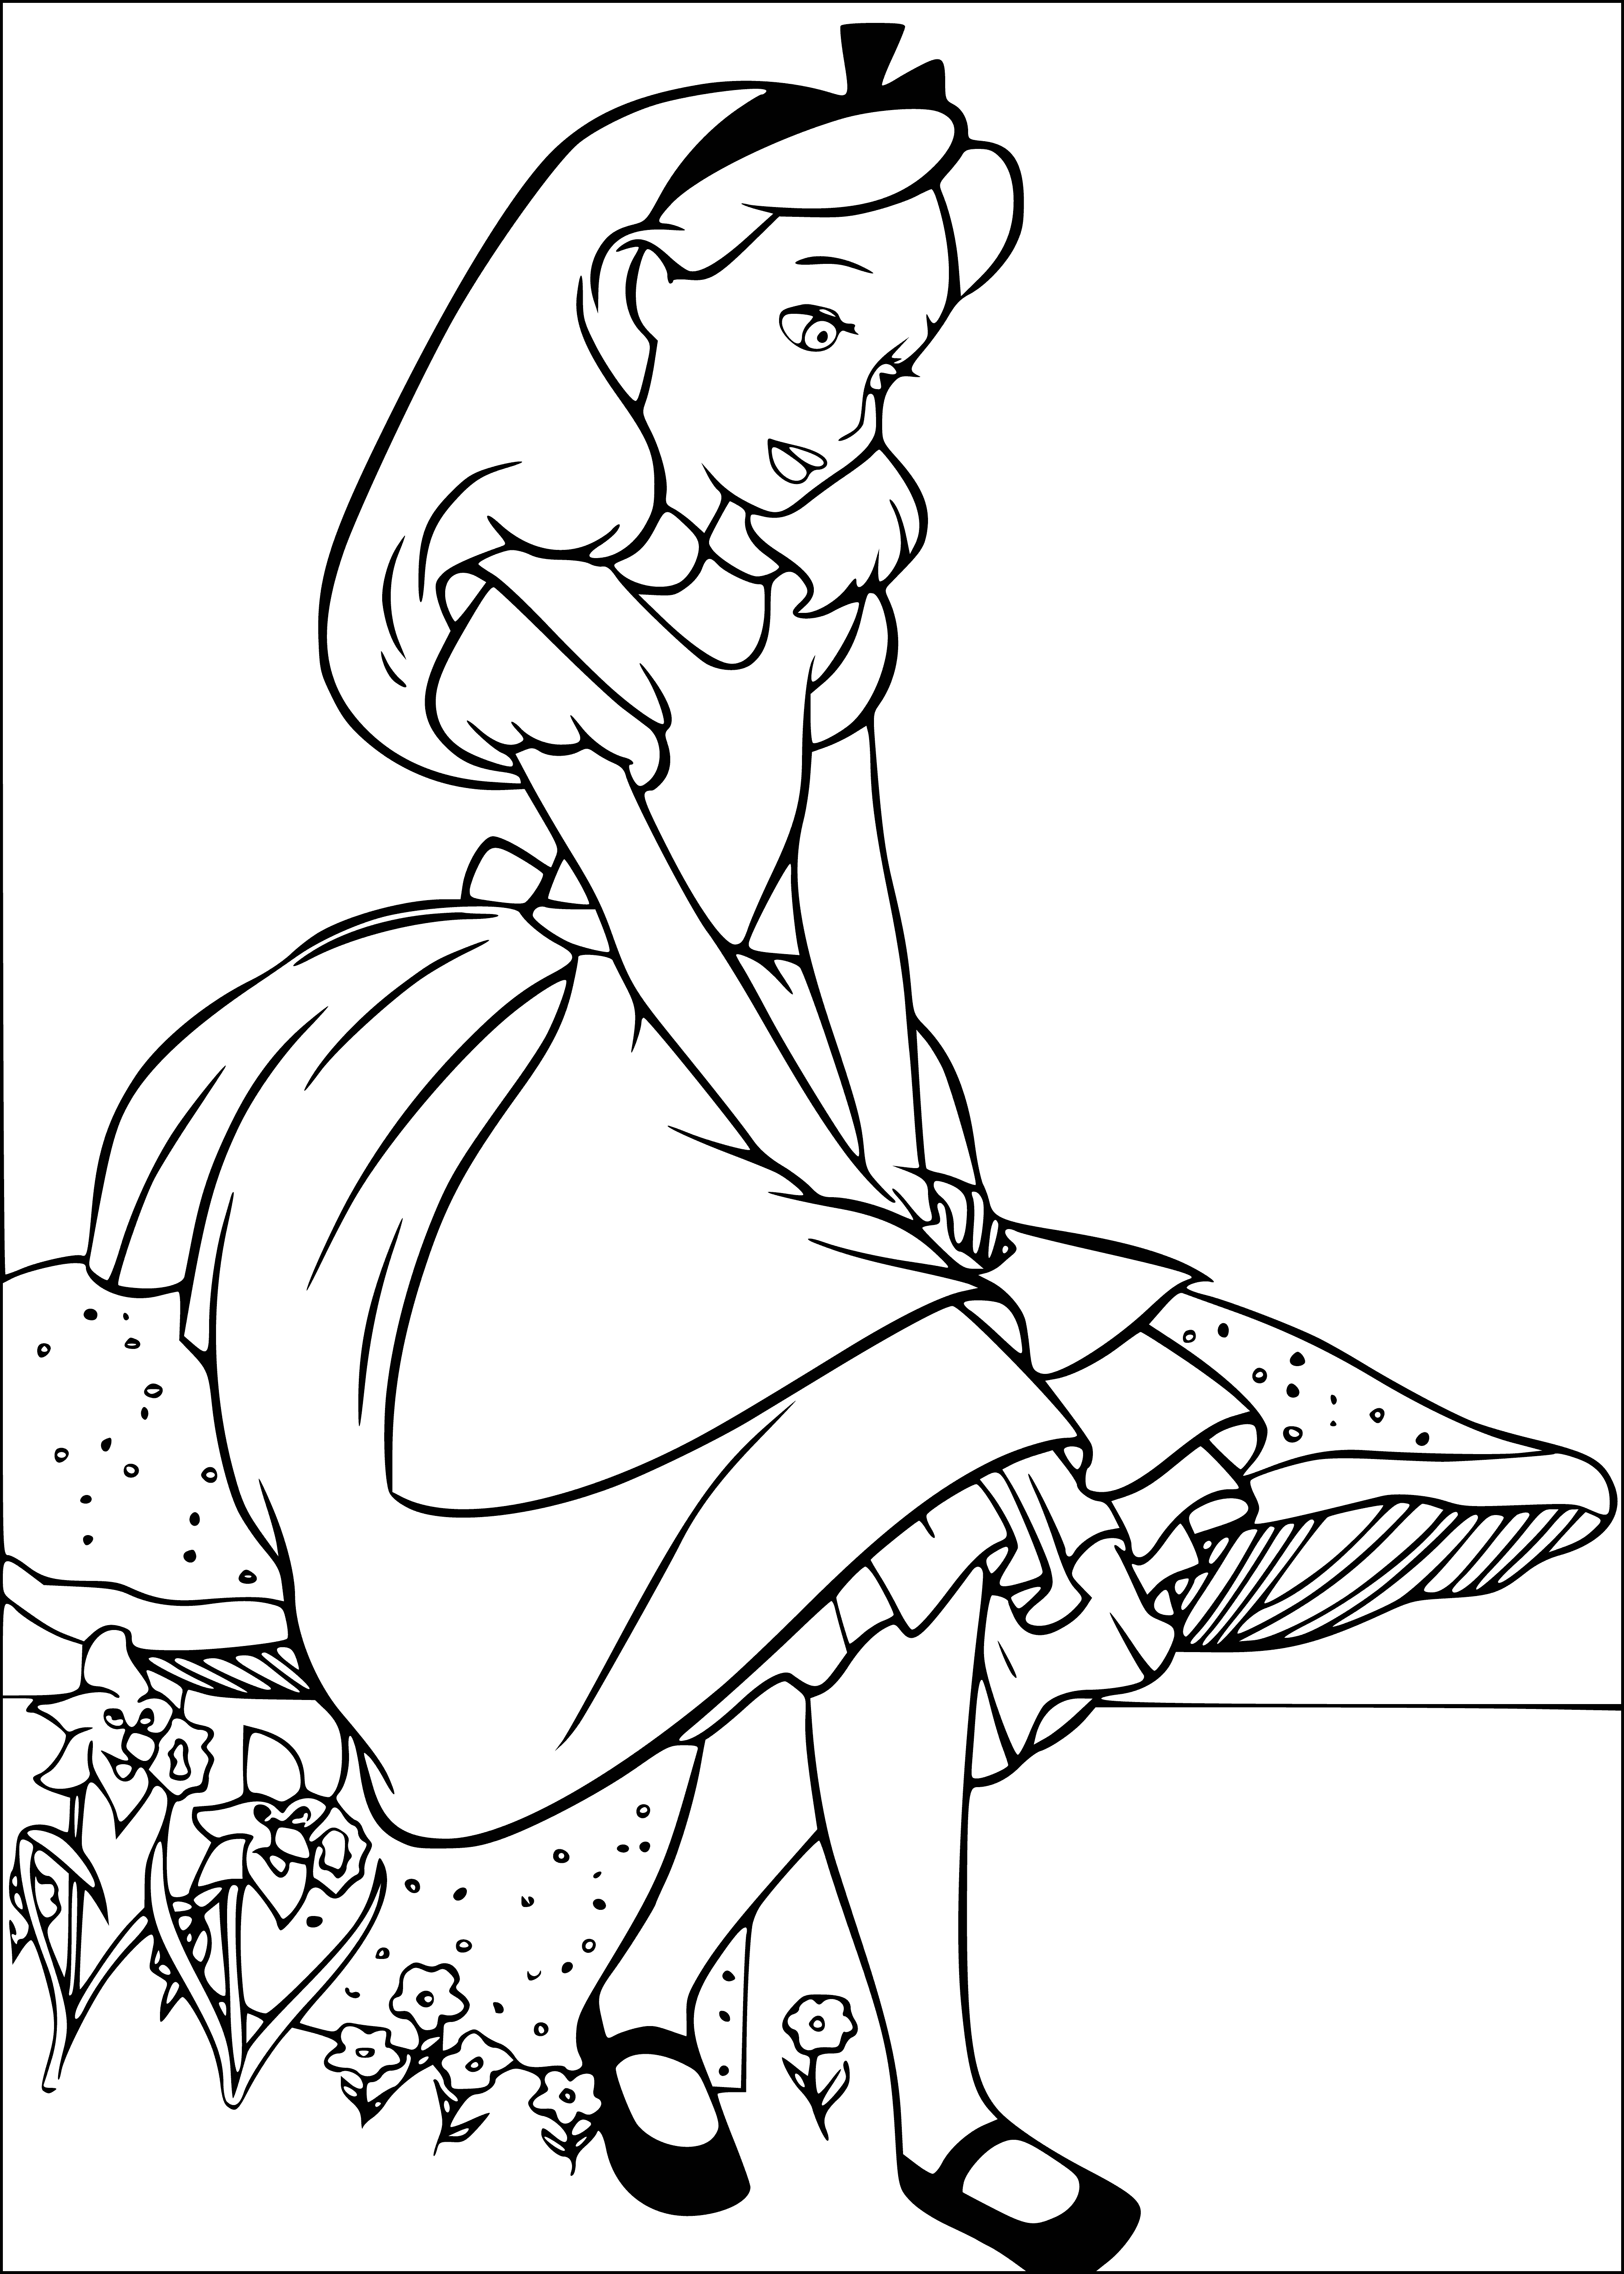 coloring page: Alice stands nervously before a toothy mushroom. Fearful